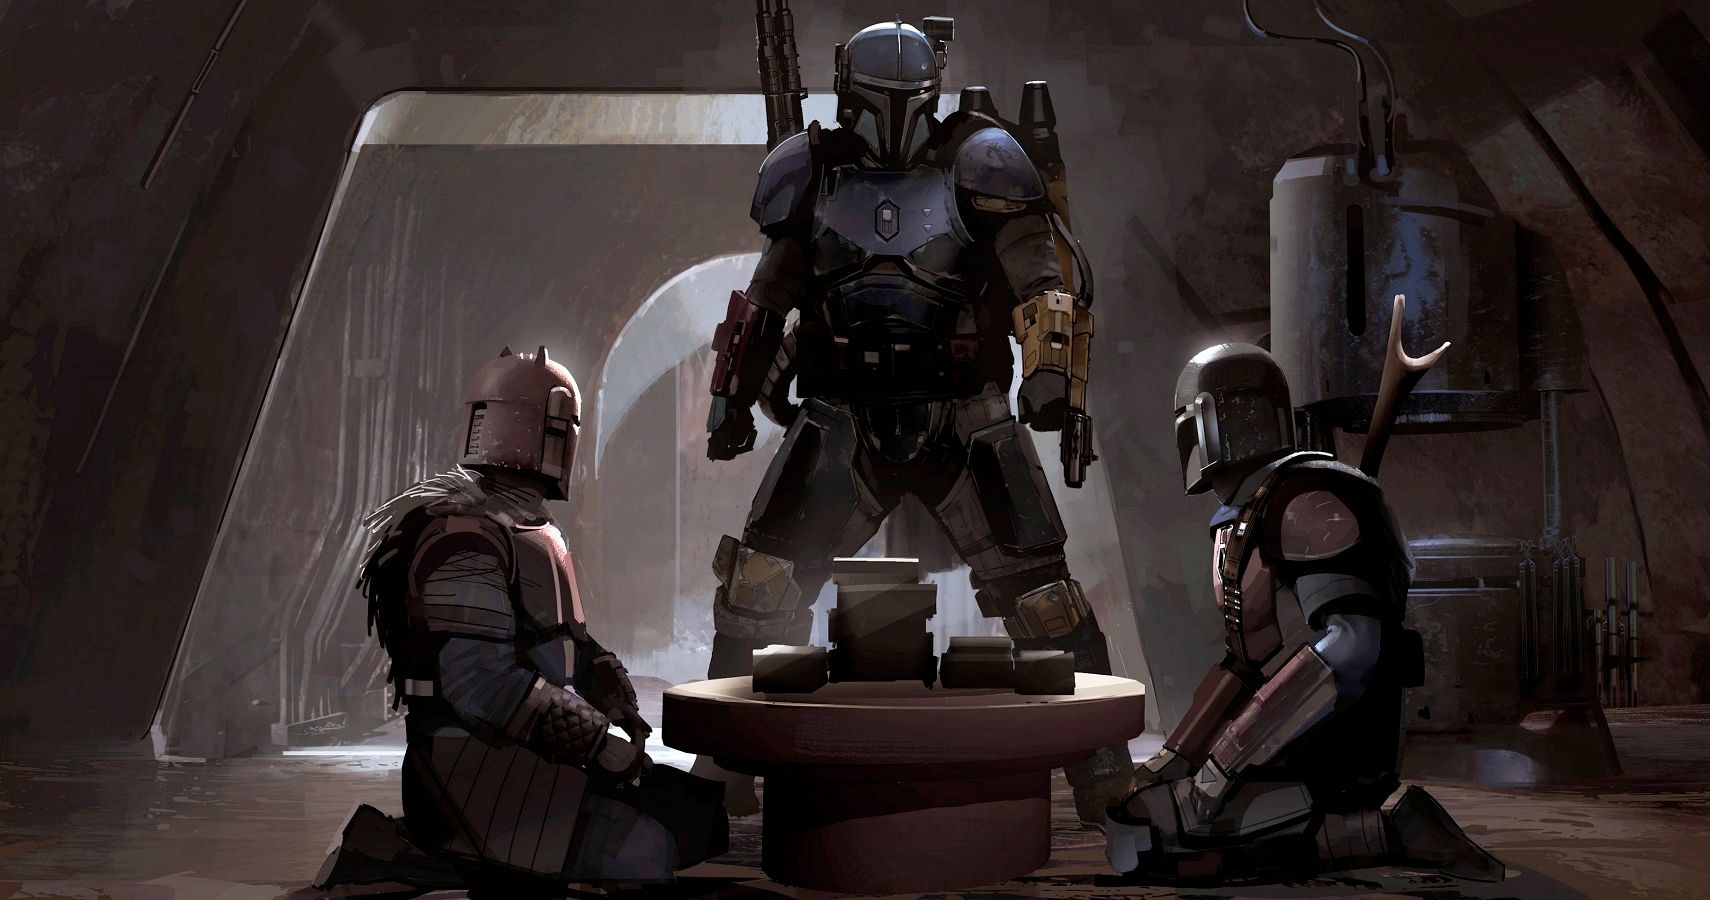 10 Star Wars Mandalorians You Didn T Know About - Bank2home.com